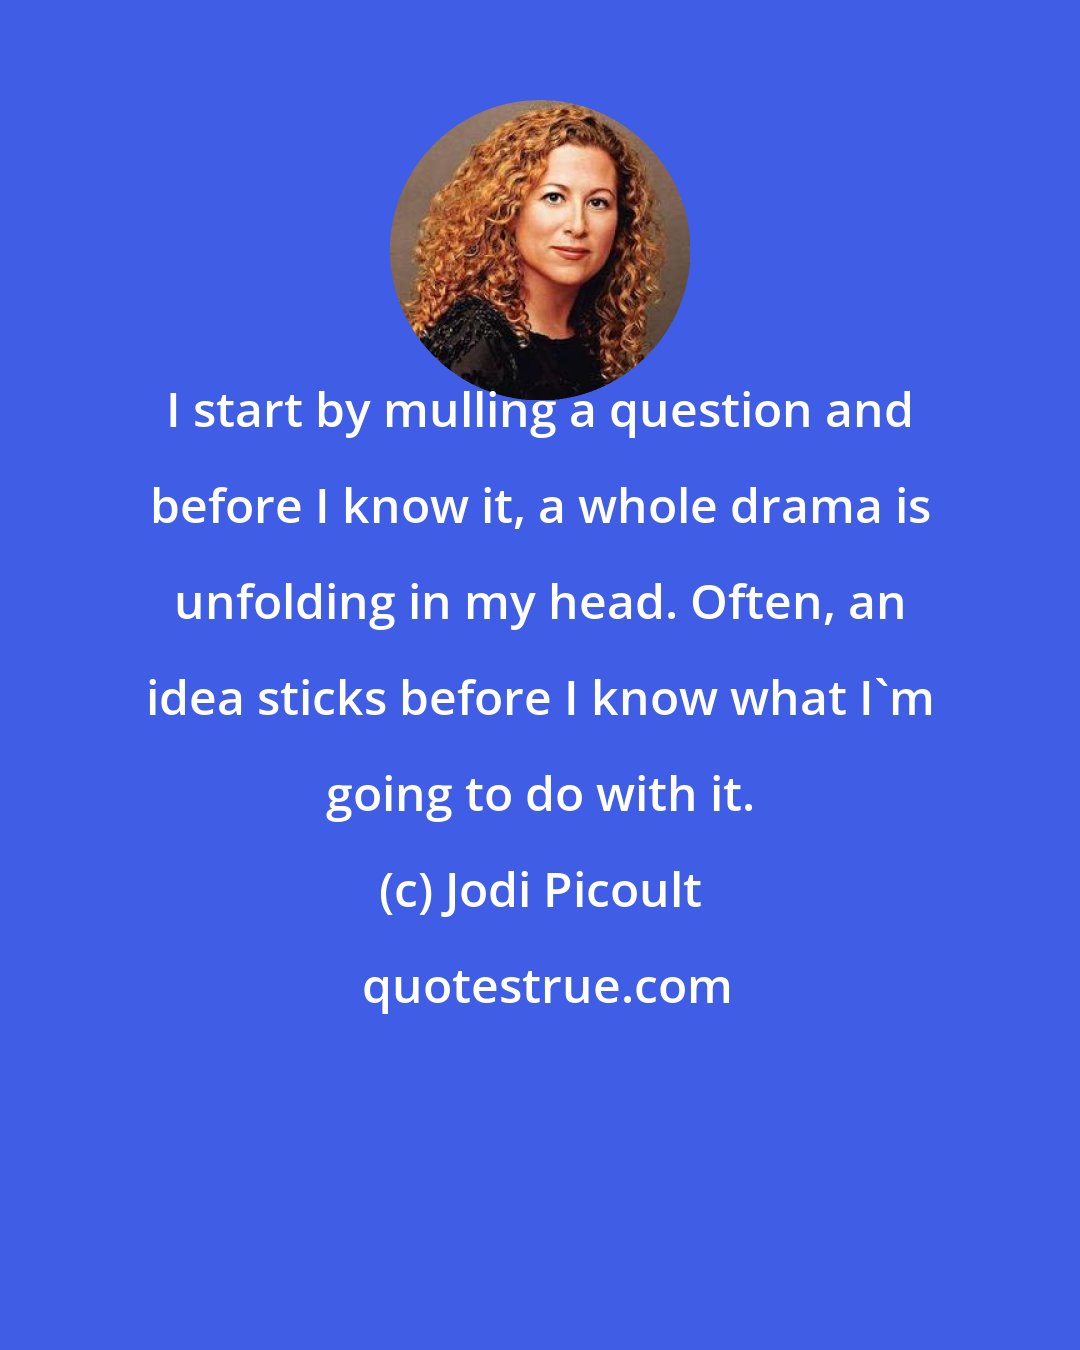 Jodi Picoult: I start by mulling a question and before I know it, a whole drama is unfolding in my head. Often, an idea sticks before I know what I'm going to do with it.